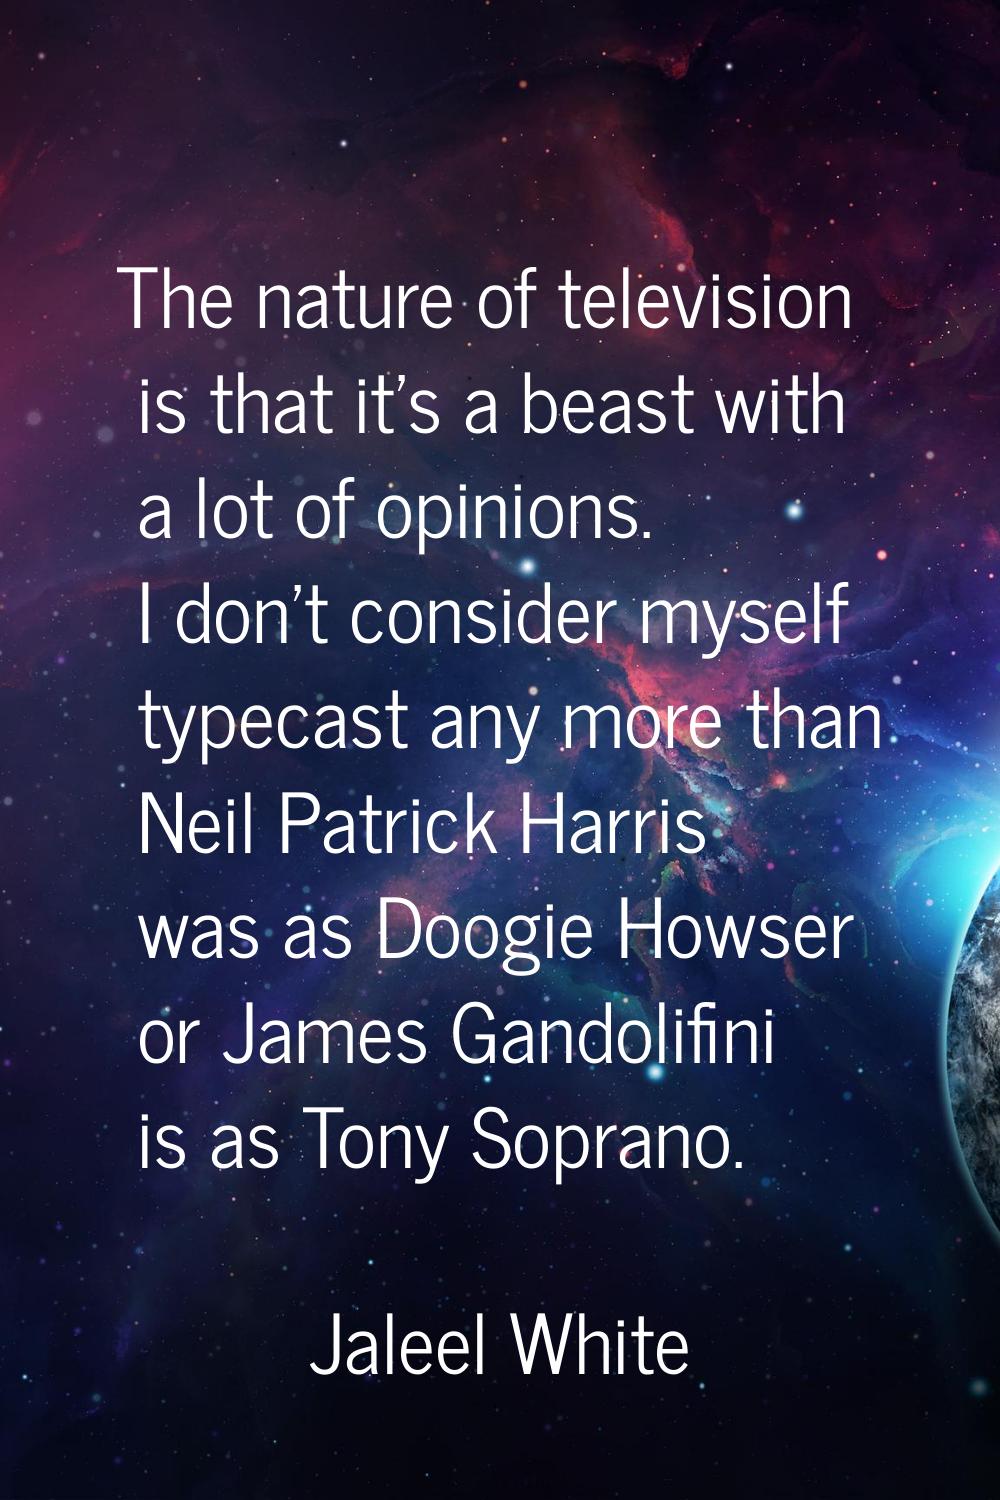 The nature of television is that it's a beast with a lot of opinions. I don't consider myself typec